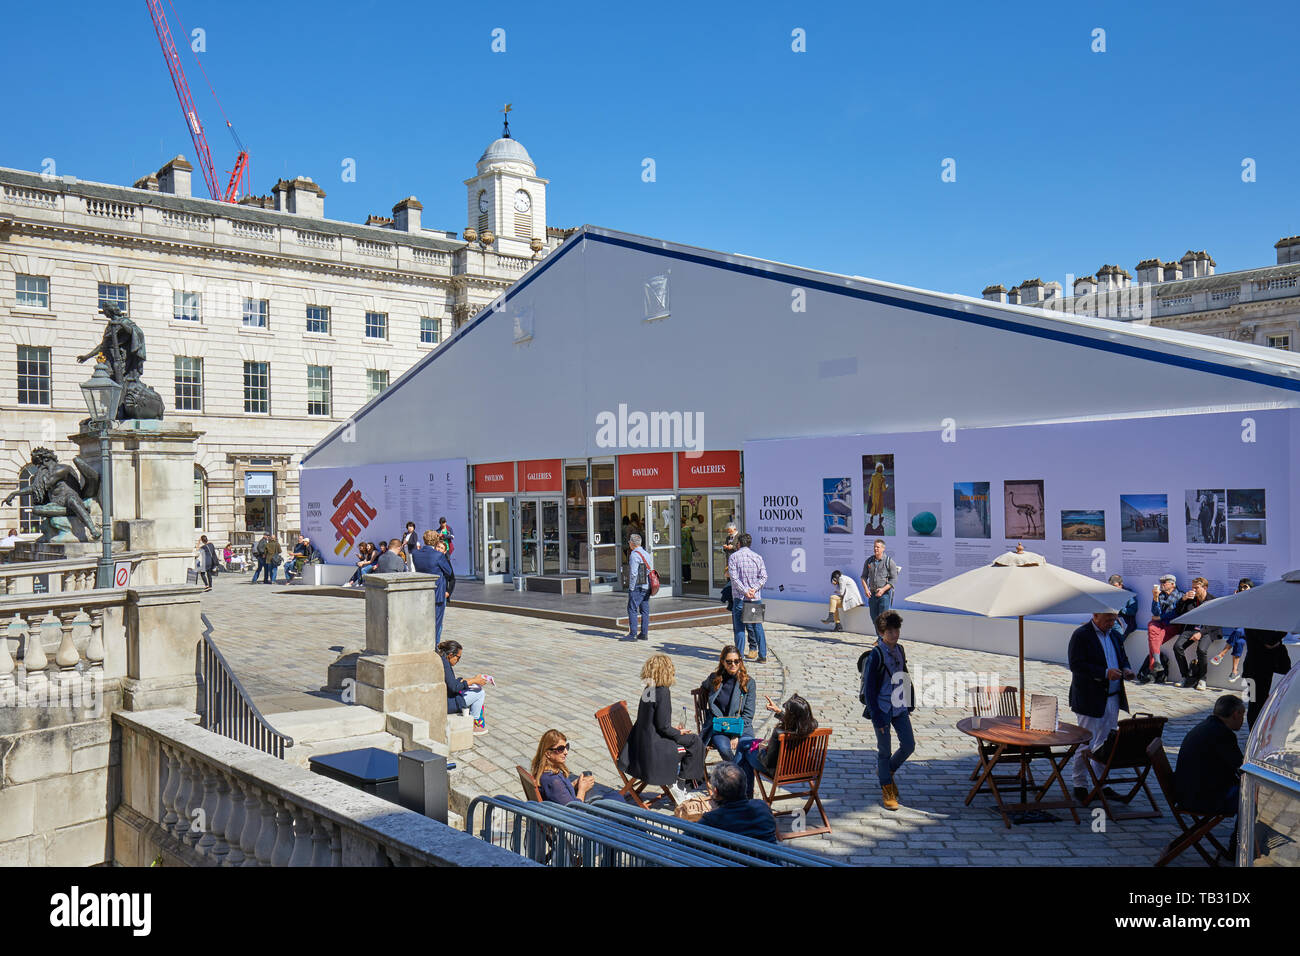 LONDON - MAY 4, 2019: Photo London, photography art fair at Somerset House with visitors in a sunny day in London, England. Stock Photo